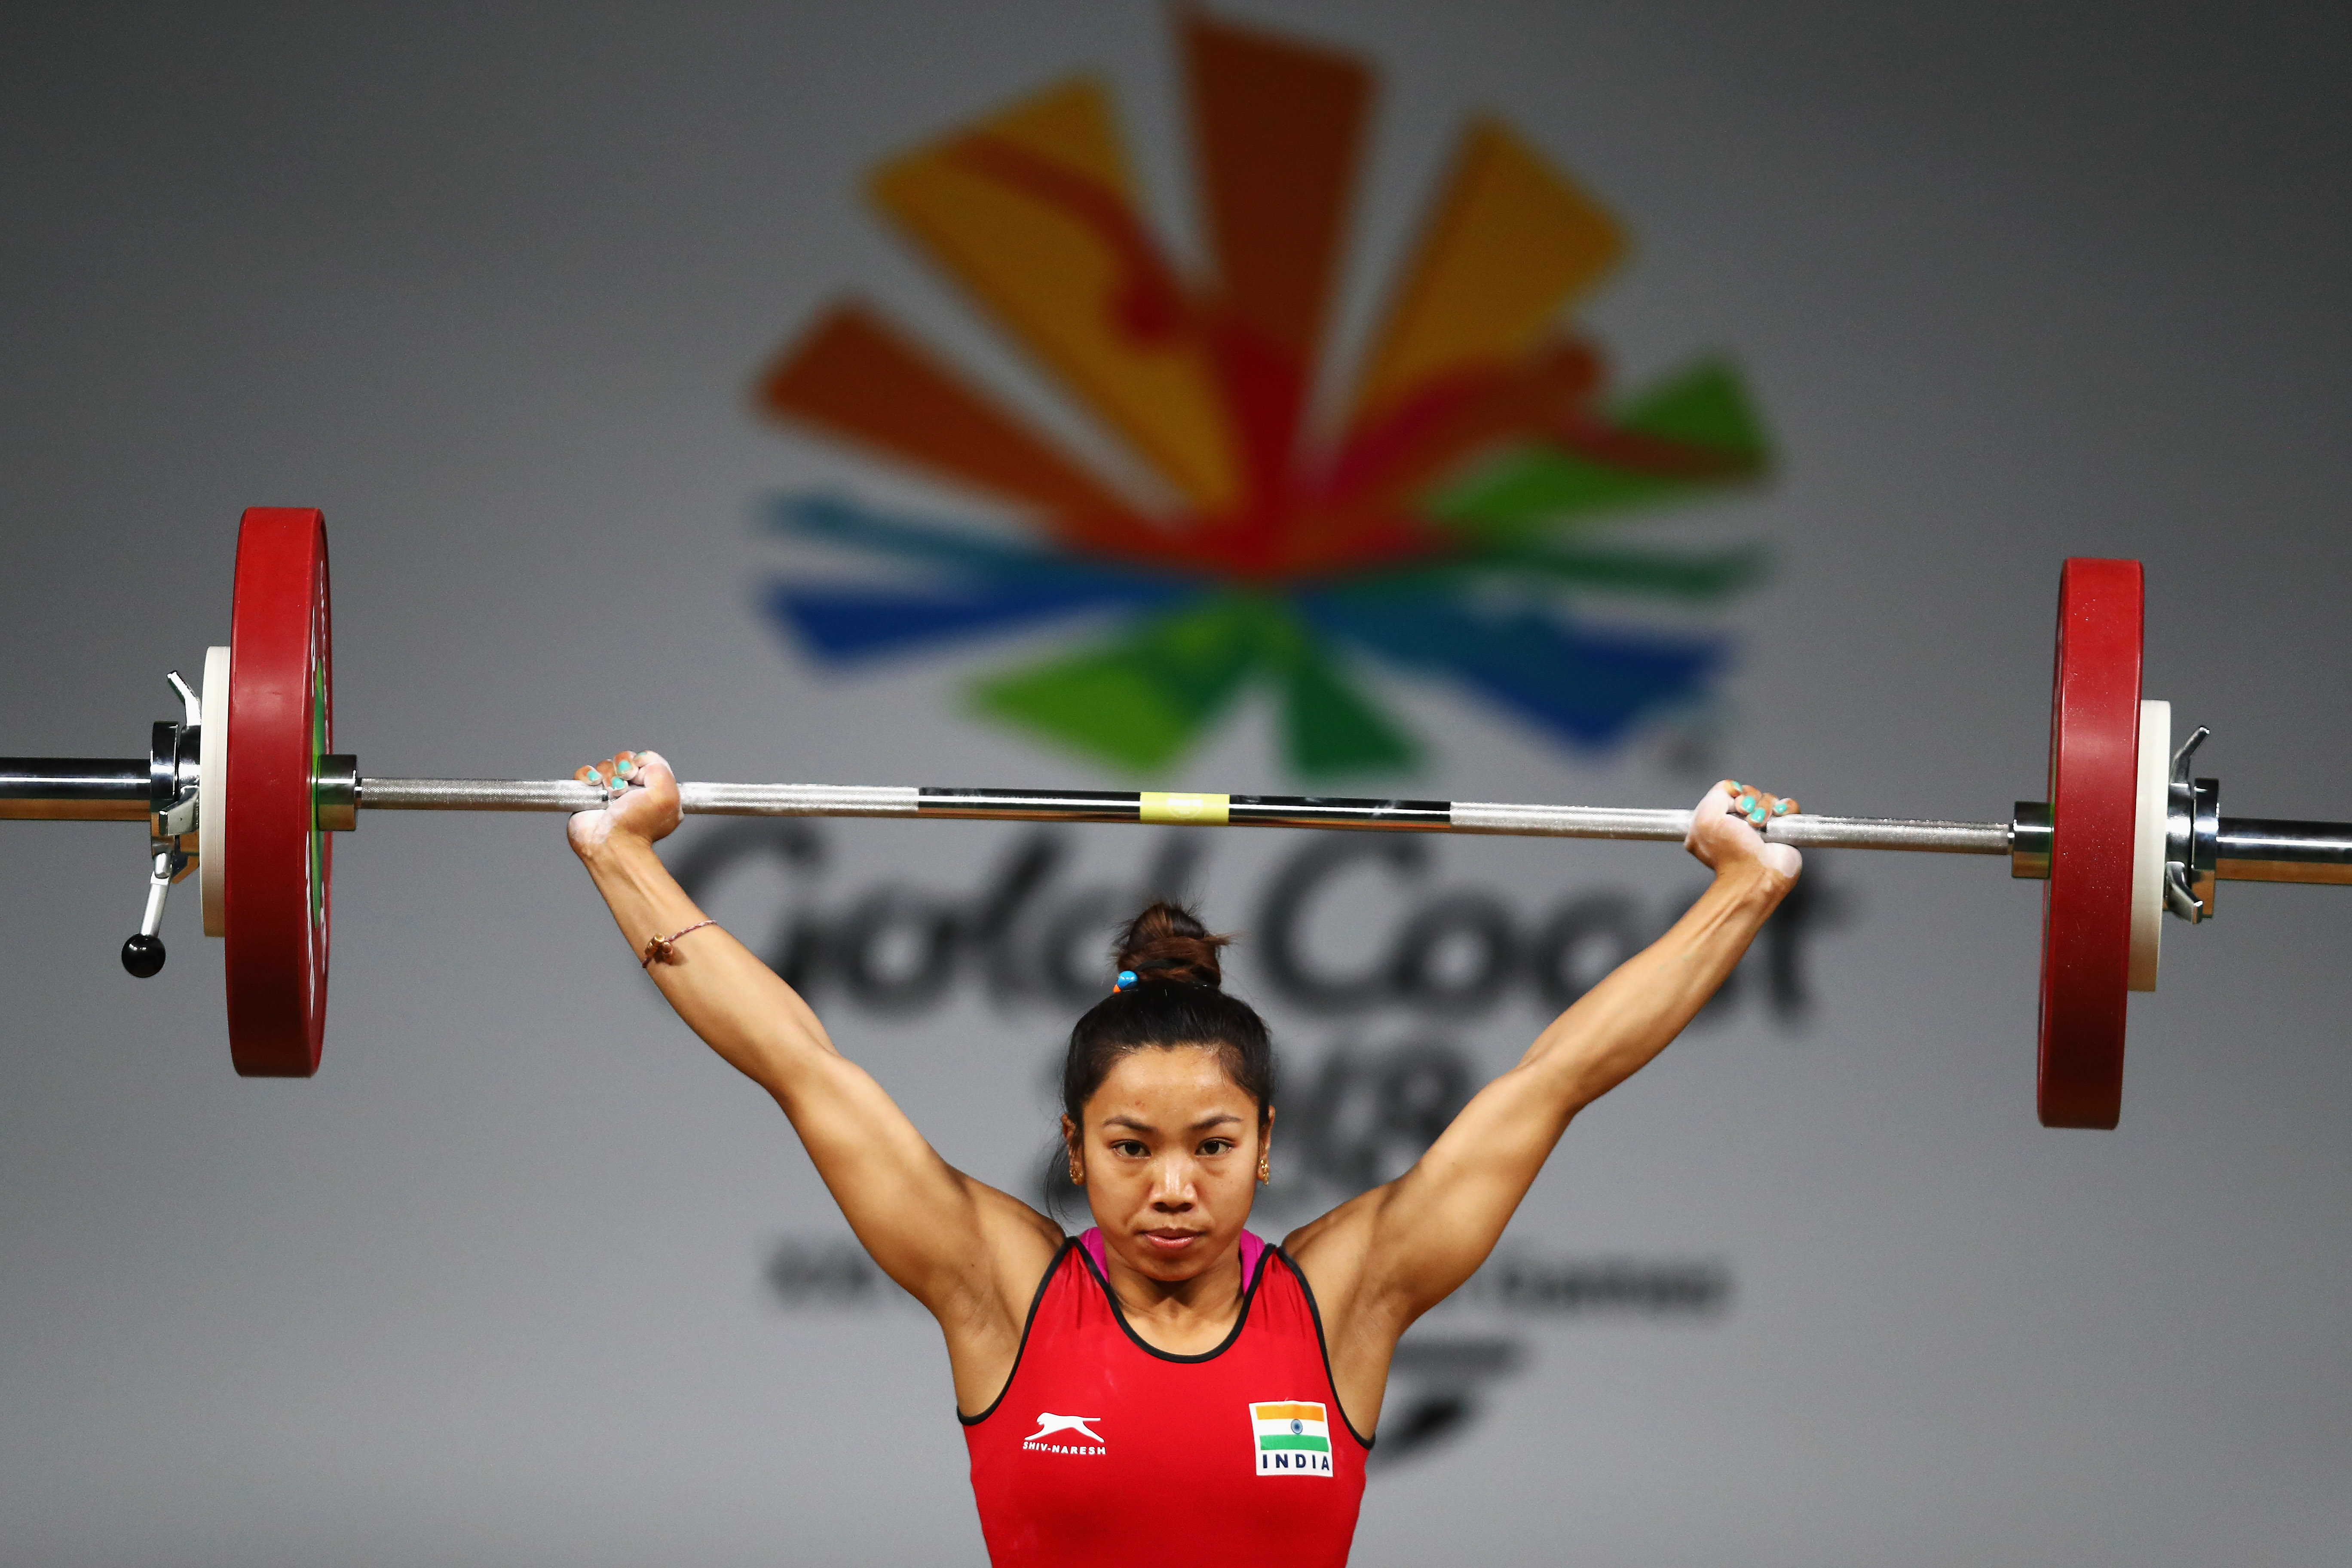 World Weightlifting Championships | Not much to look forward to for India as Mirabai Chanu to only appear for weigh-in